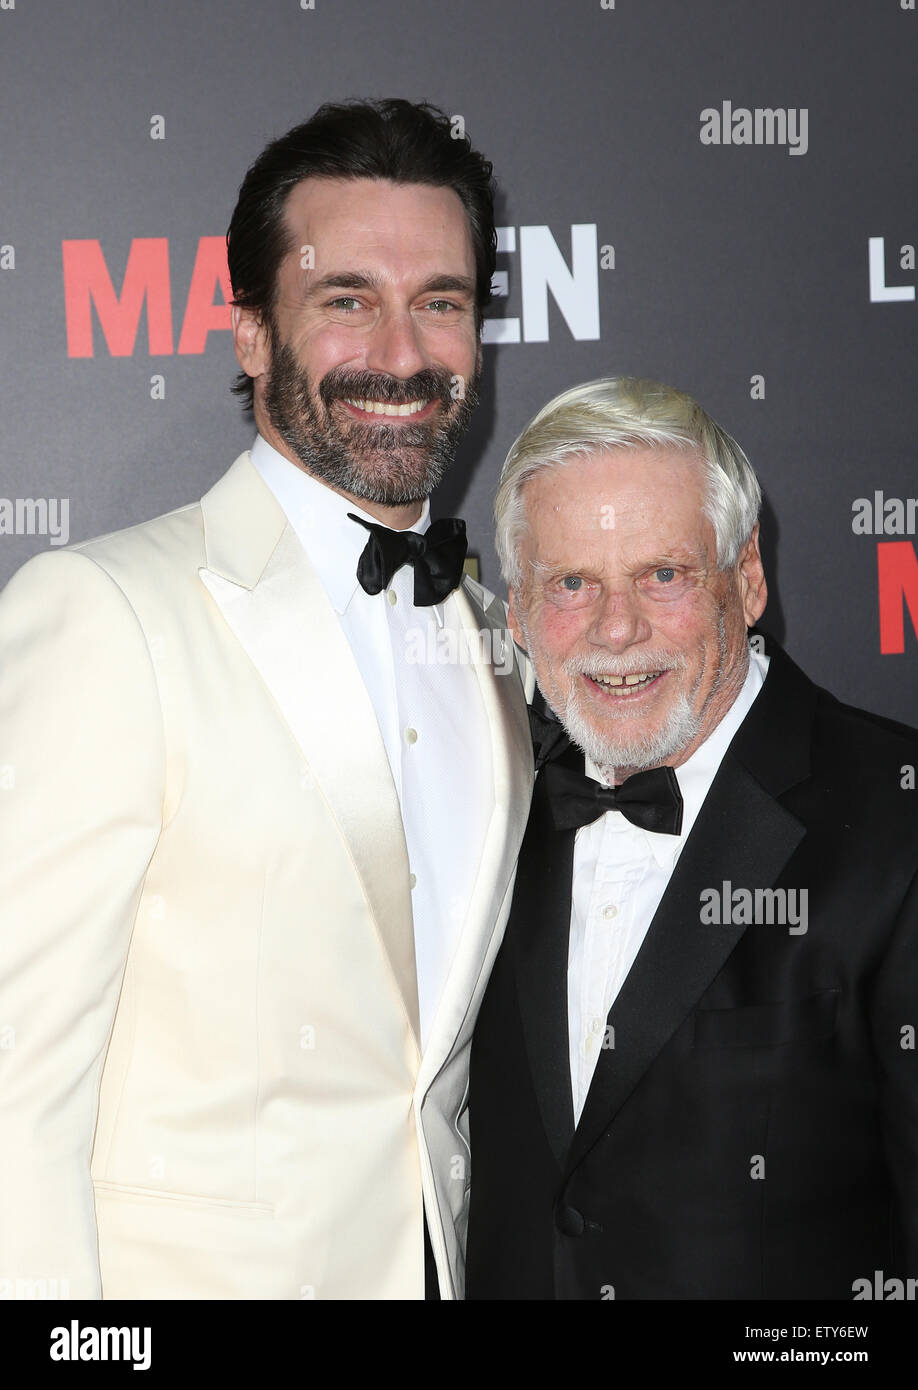 AMC Celebrates The Mad Men 7 Episodes Of 'Mad Men' With The Black & Red Ball  Featuring: Jon Hamm, Robert Morse Where: Los Angeles, California, United States When: 26 Mar 2015 C Stock Photo